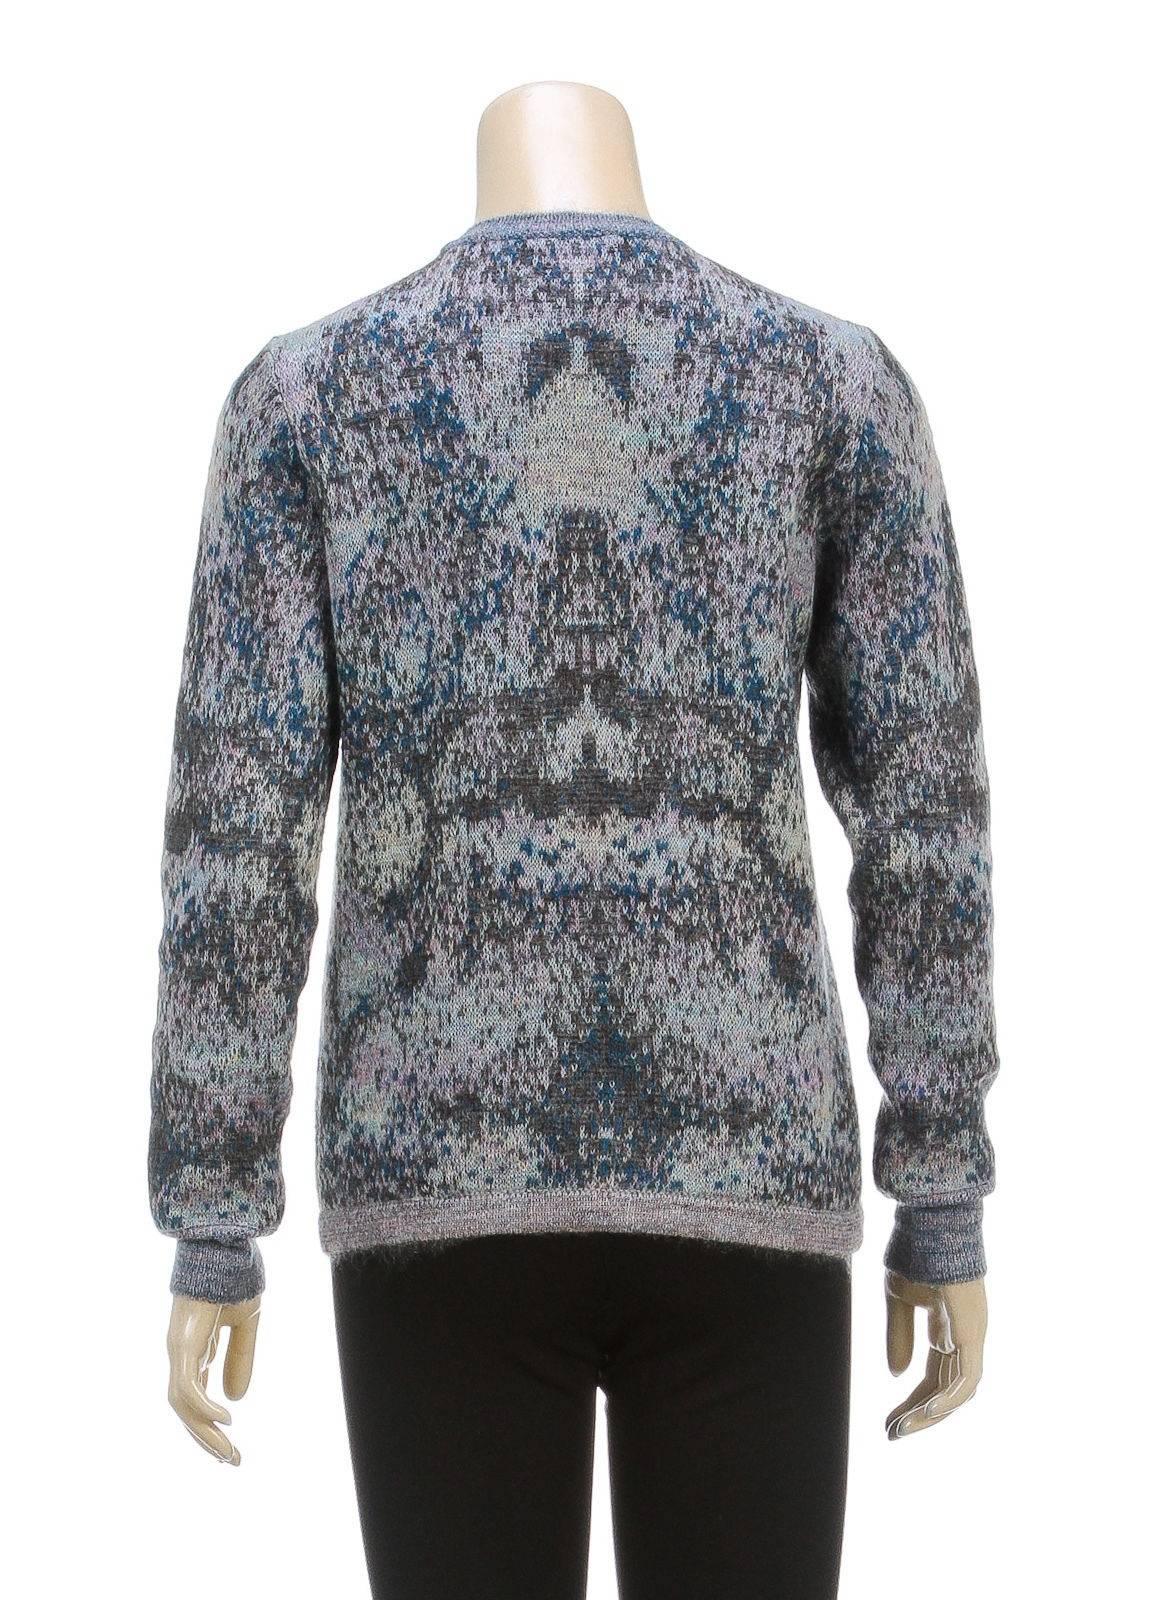 Chanel Gray Multicolor Long Sleeve Sequin Sweater (Size 36) For Sale 2